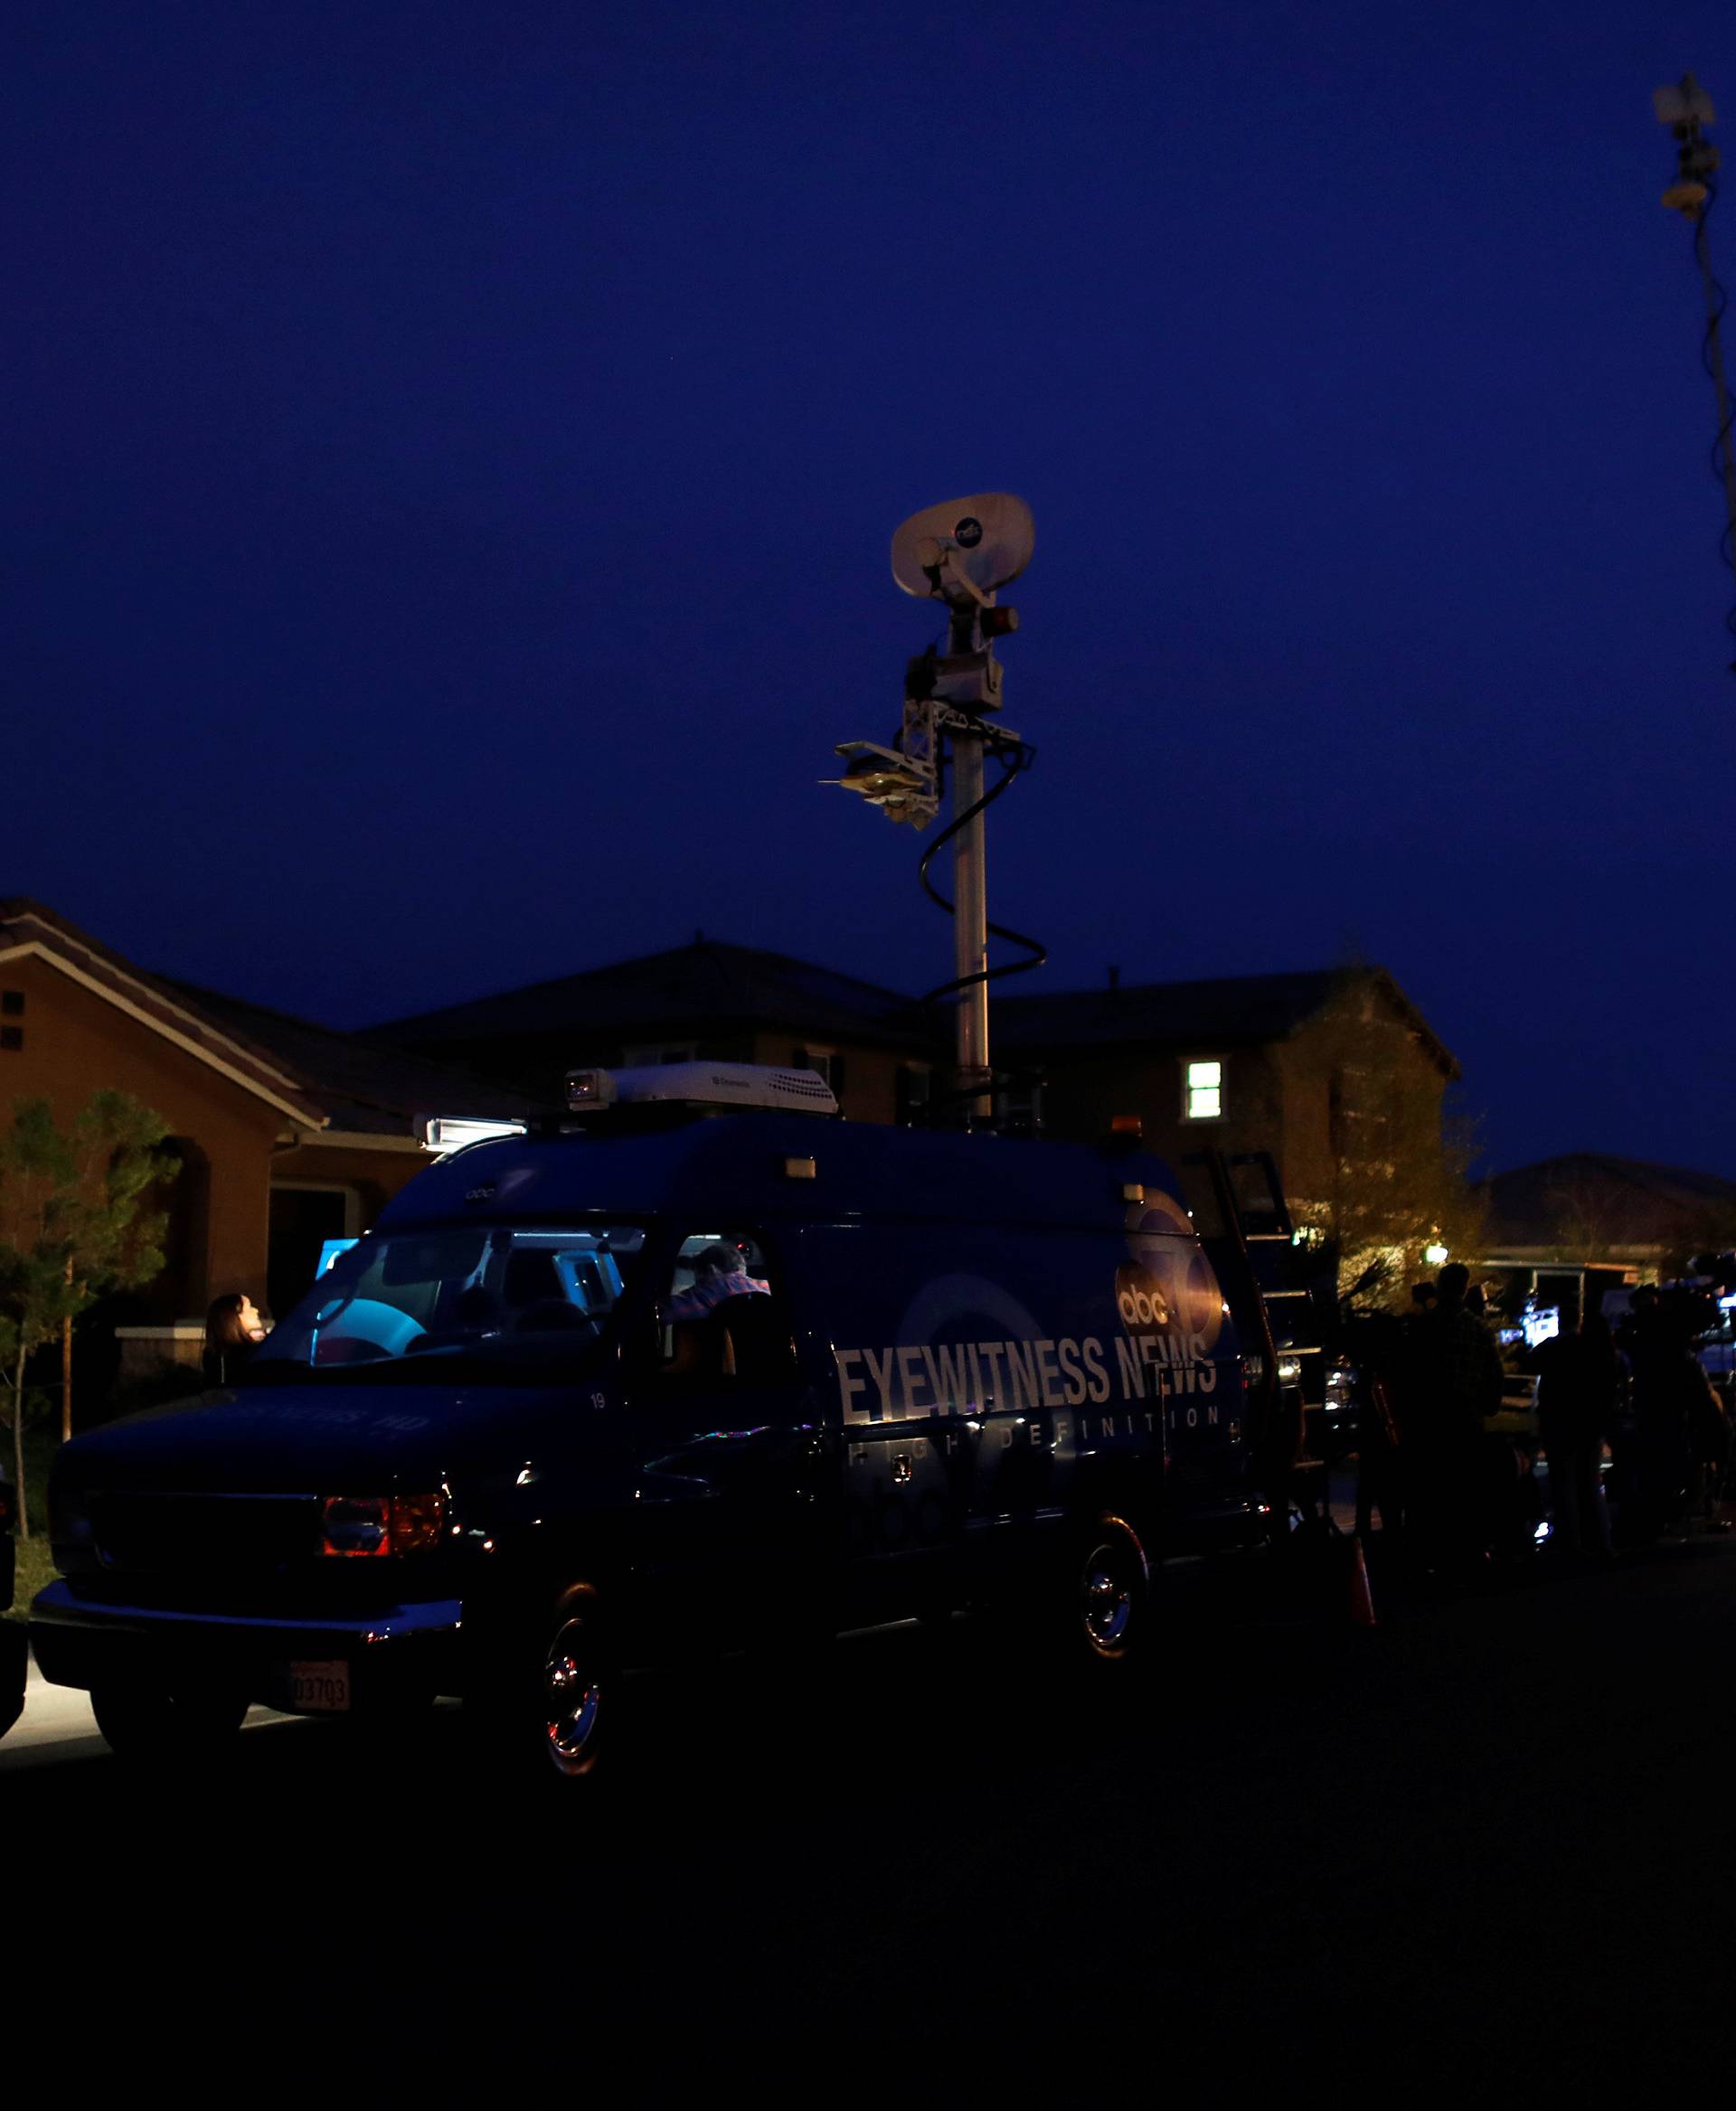 News crews gather outside the home of David Allen and Louise Anna Turpin in Perris, California